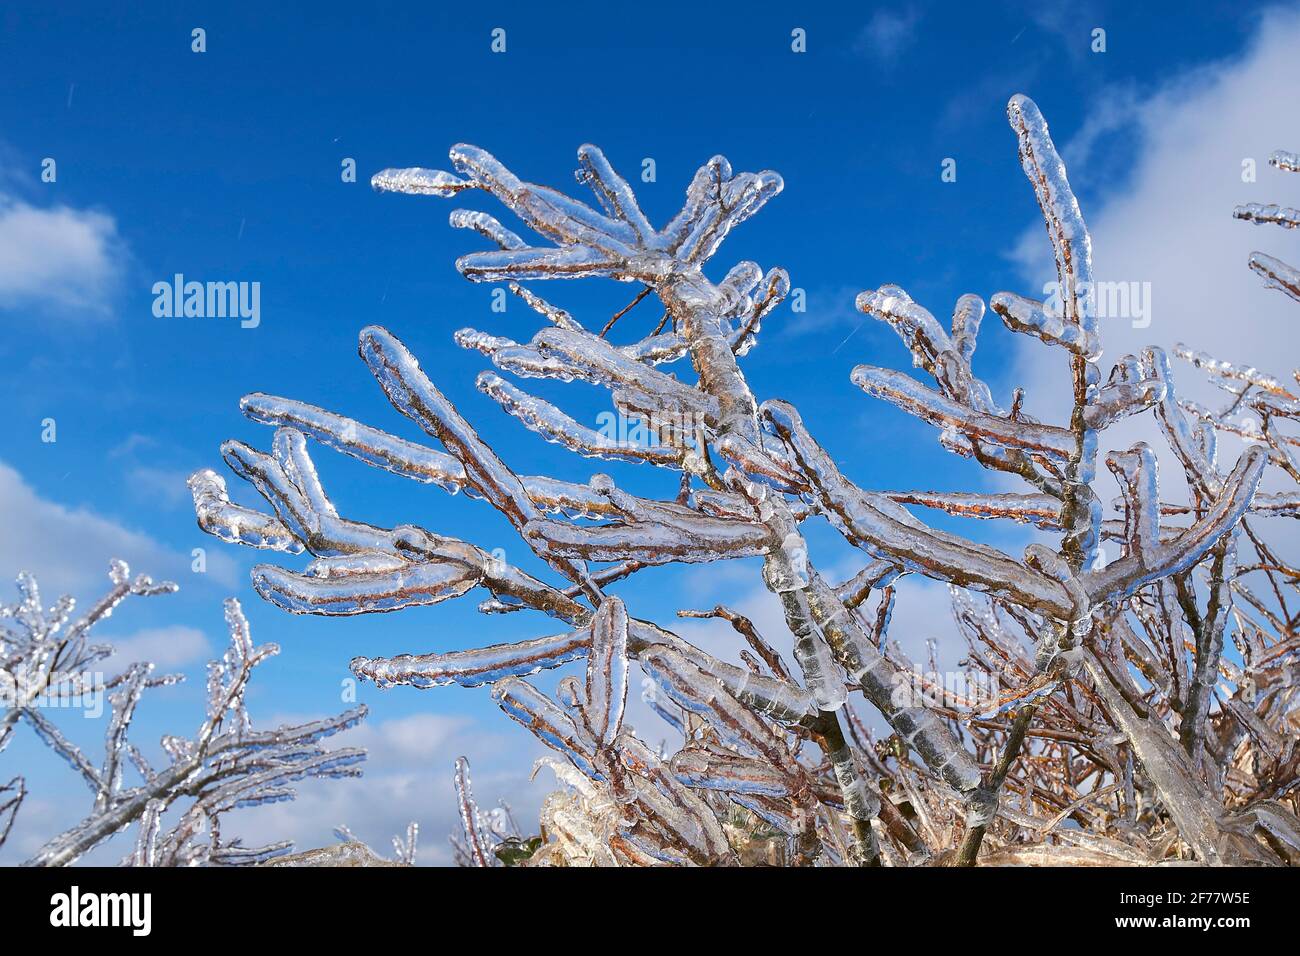 France, Finistere, Armoric Natural Regional parc, Aree mounts, Saint Rivoal, plant frozen in winter at Mont Saint-Michel in Brasparts Stock Photo